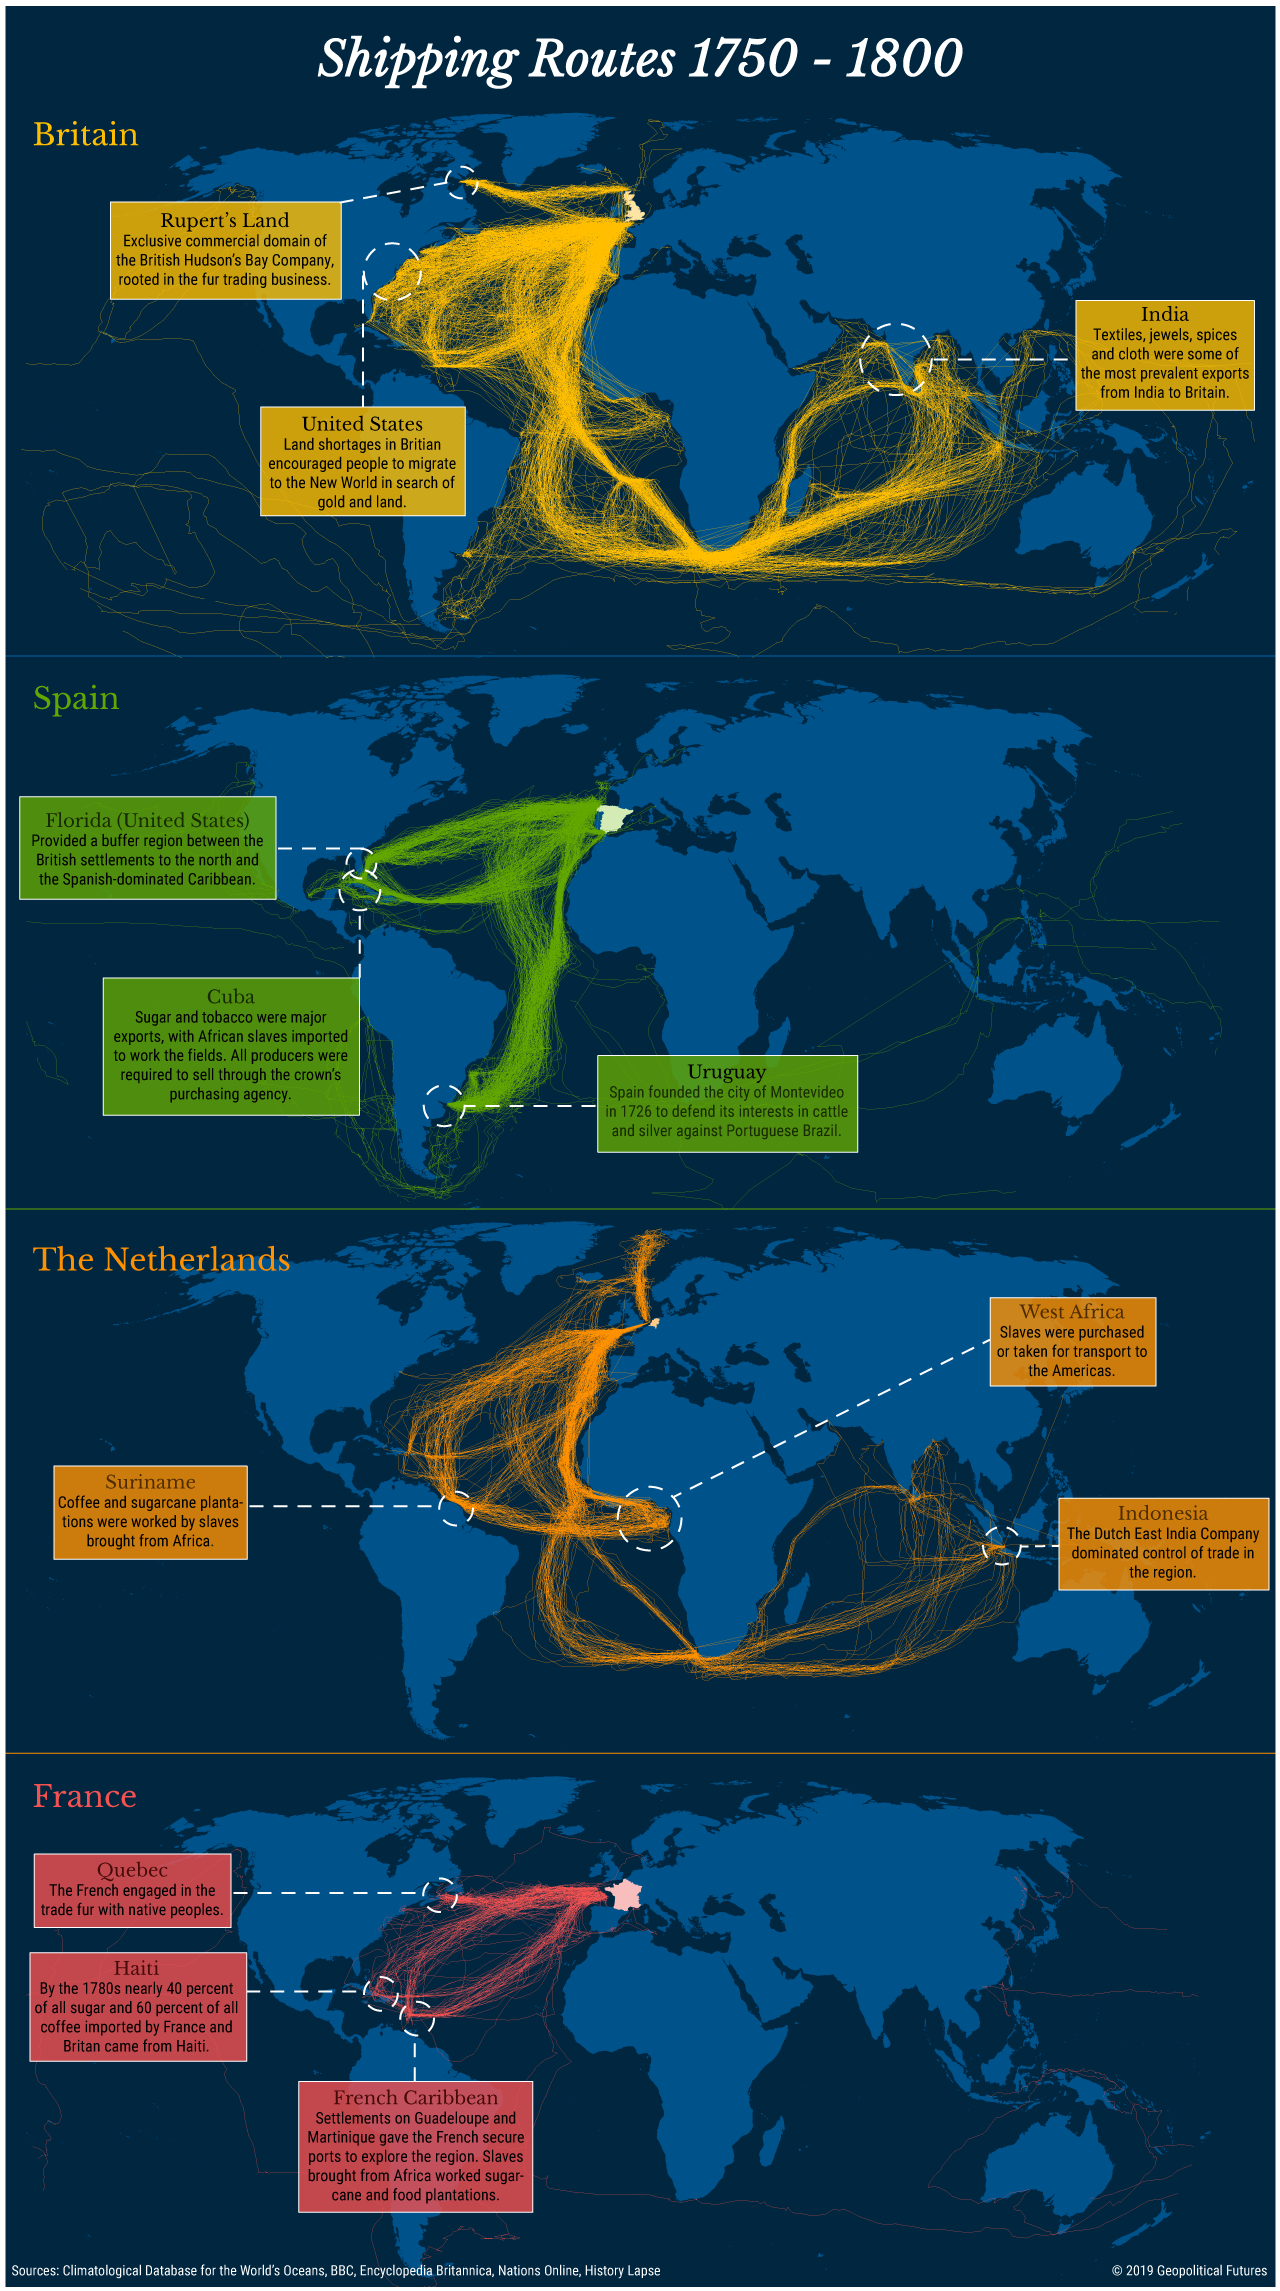 Shipping Routes 1750 - 1800